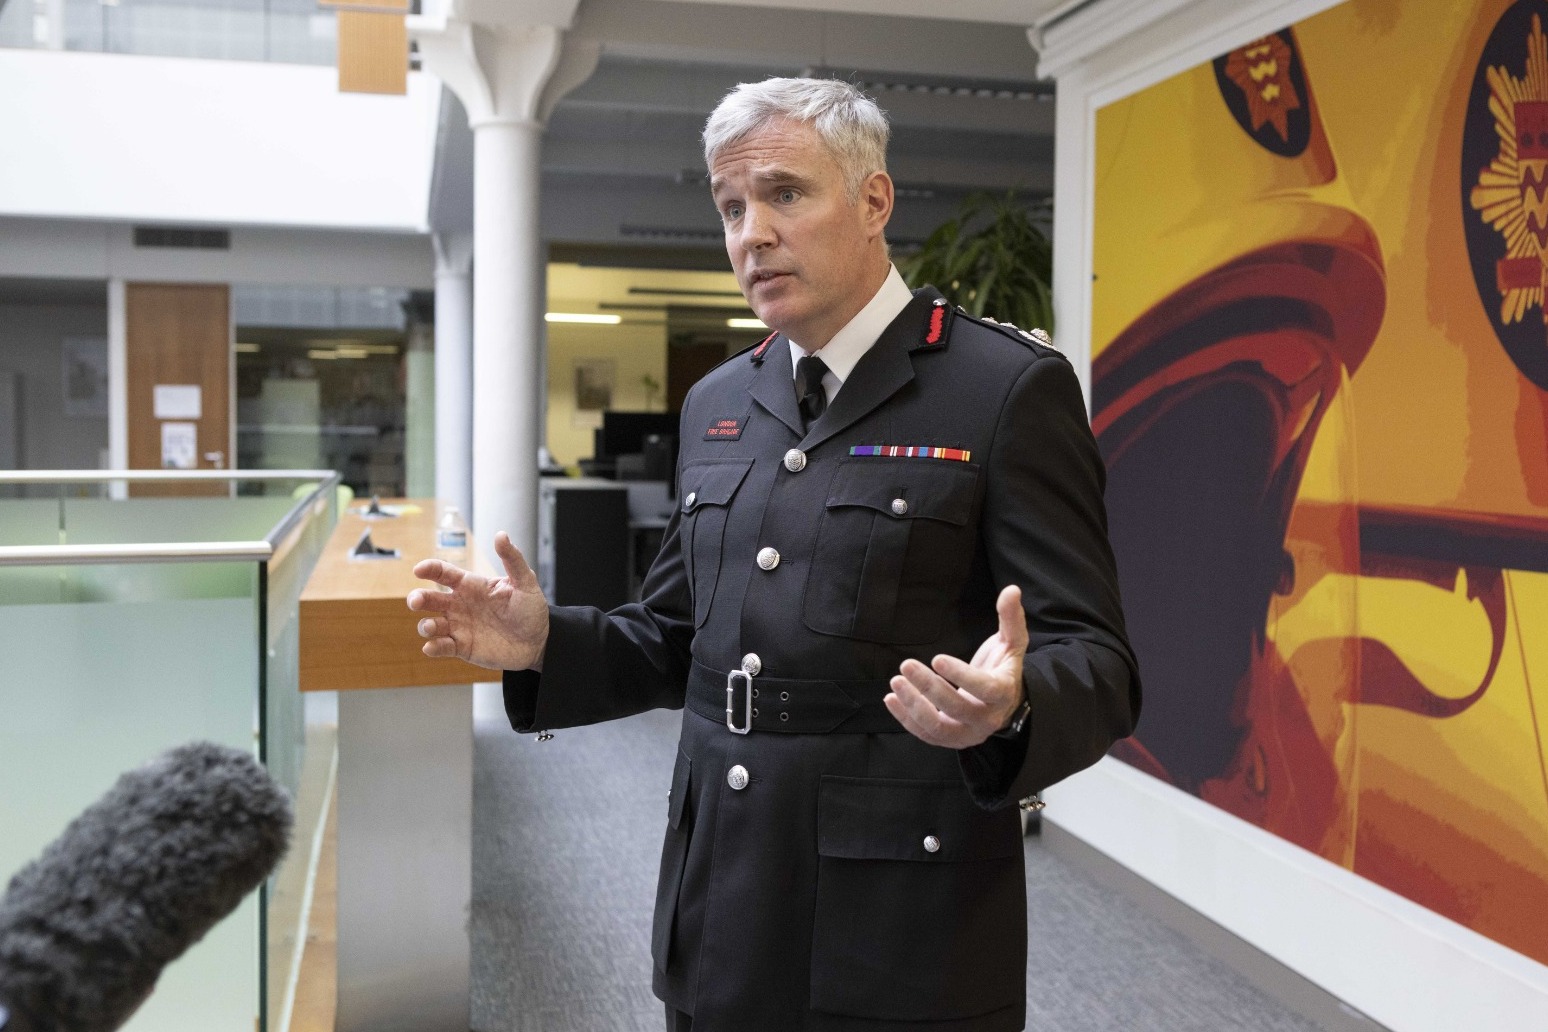 Firefighters face sack if found to have bullied or been racist, LFB boss says 